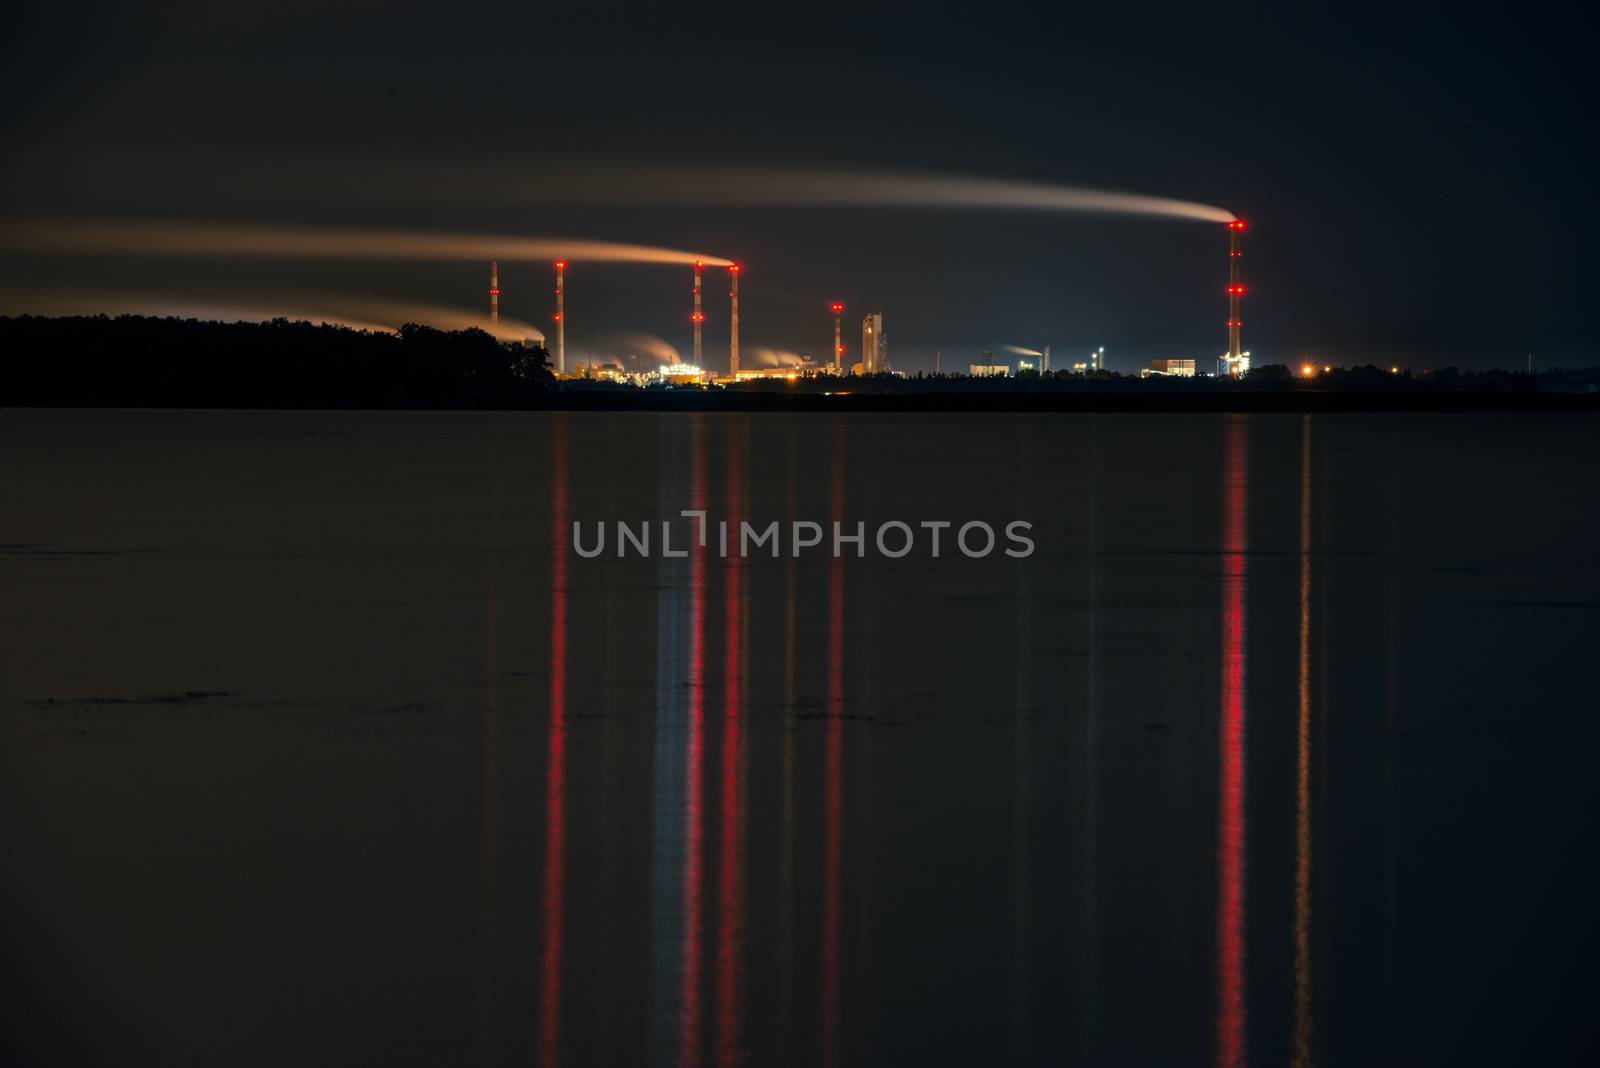 Industrial park at night, Tall chimney with smoke. Police Poland by Brejeq